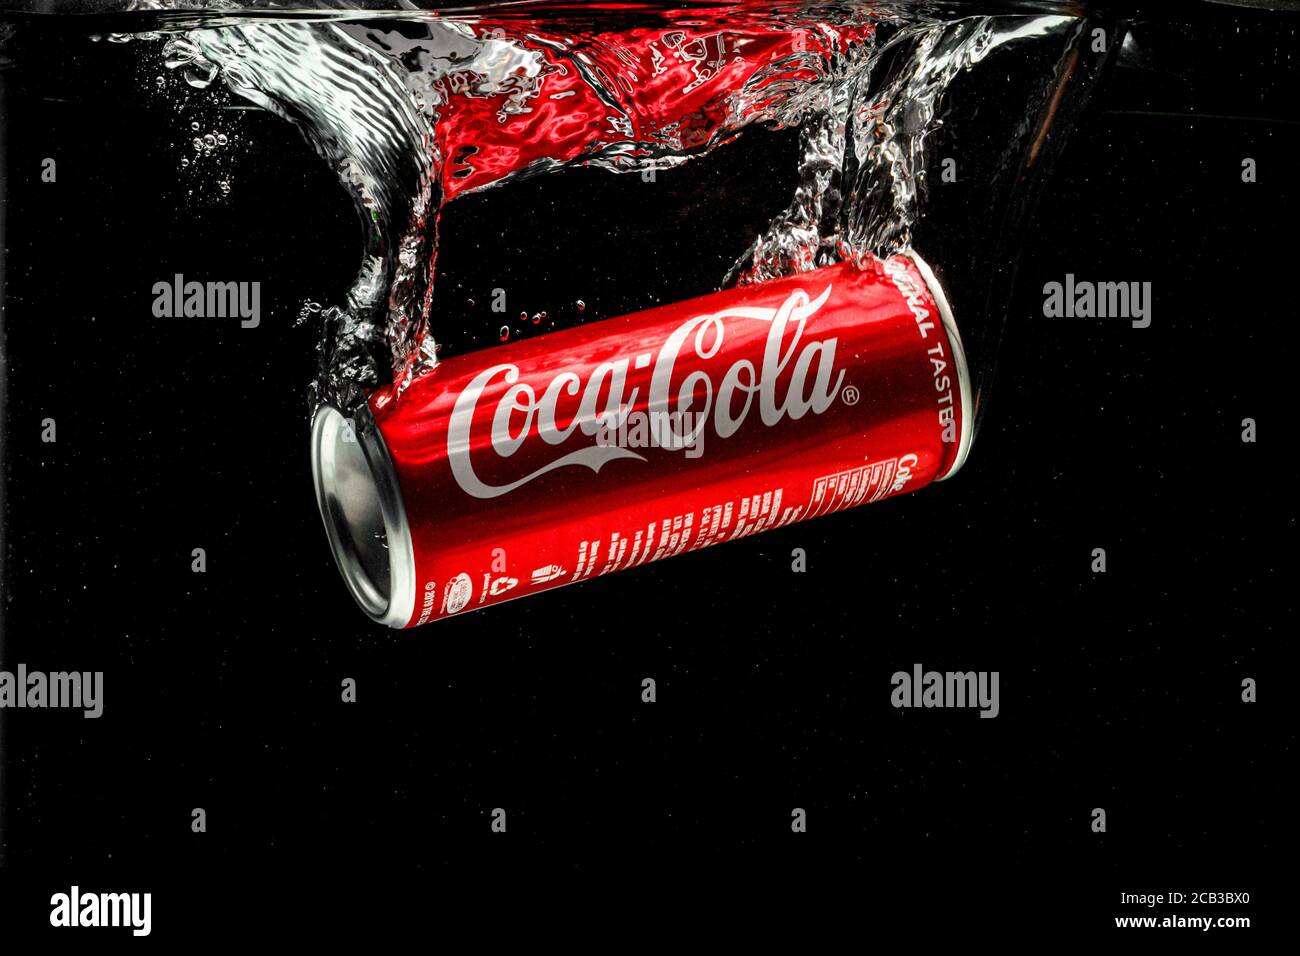 Coca cola can splashing in to water on black background Stock Photo - Alamy